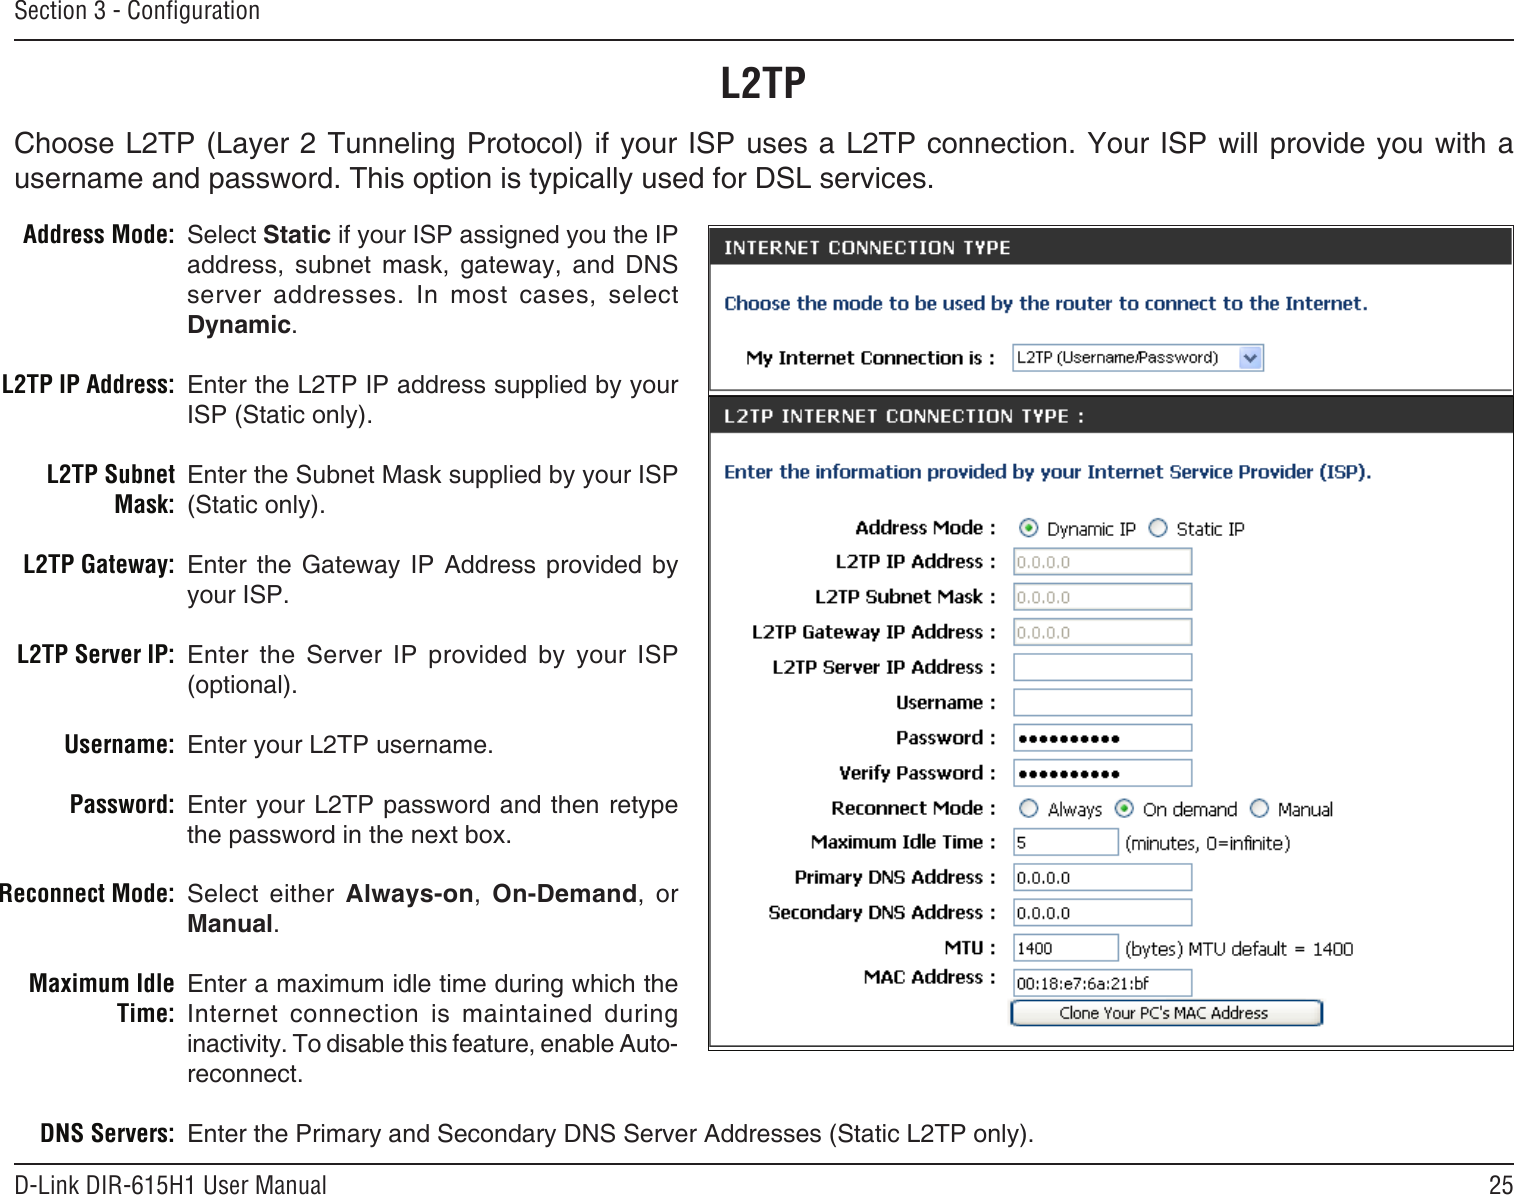 25D-Link DIR-615H1 User ManualSection 3 - CongurationSelect Static if your ISP assigned you the IP address,  subnet  mask,  gateway,  and  DNS server  addresses.  In  most  cases,  select Dynamic.Enter the L2TP IP address supplied by your ISP (Static only).Enter the Subnet Mask supplied by your ISP (Static only).Enter  the  Gateway  IP  Address  provided  by your ISP.Enter  the  Server  IP  provided  by  your  ISP (optional).Enter your L2TP username.Enter your L2TP password and then retype the password in the next box.Select  either  Always-on,  On-Demand,  or Manual.Enter a maximum idle time during which the Internet  connection  is  maintained  during inactivity. To disable this feature, enable Auto-reconnect.Enter the Primary and Secondary DNS Server Addresses (Static L2TP only).Address Mode:L2TP IP Address:L2TP Subnet Mask:L2TP Gateway:L2TP Server IP:Username:Password:Reconnect Mode:Maximum Idle Time: DNS Servers:L2TPChoose L2TP (Layer 2 Tunneling Protocol) if your ISP uses a L2TP connection. Your ISP will provide you with a username and password. This option is typically used for DSL services. 